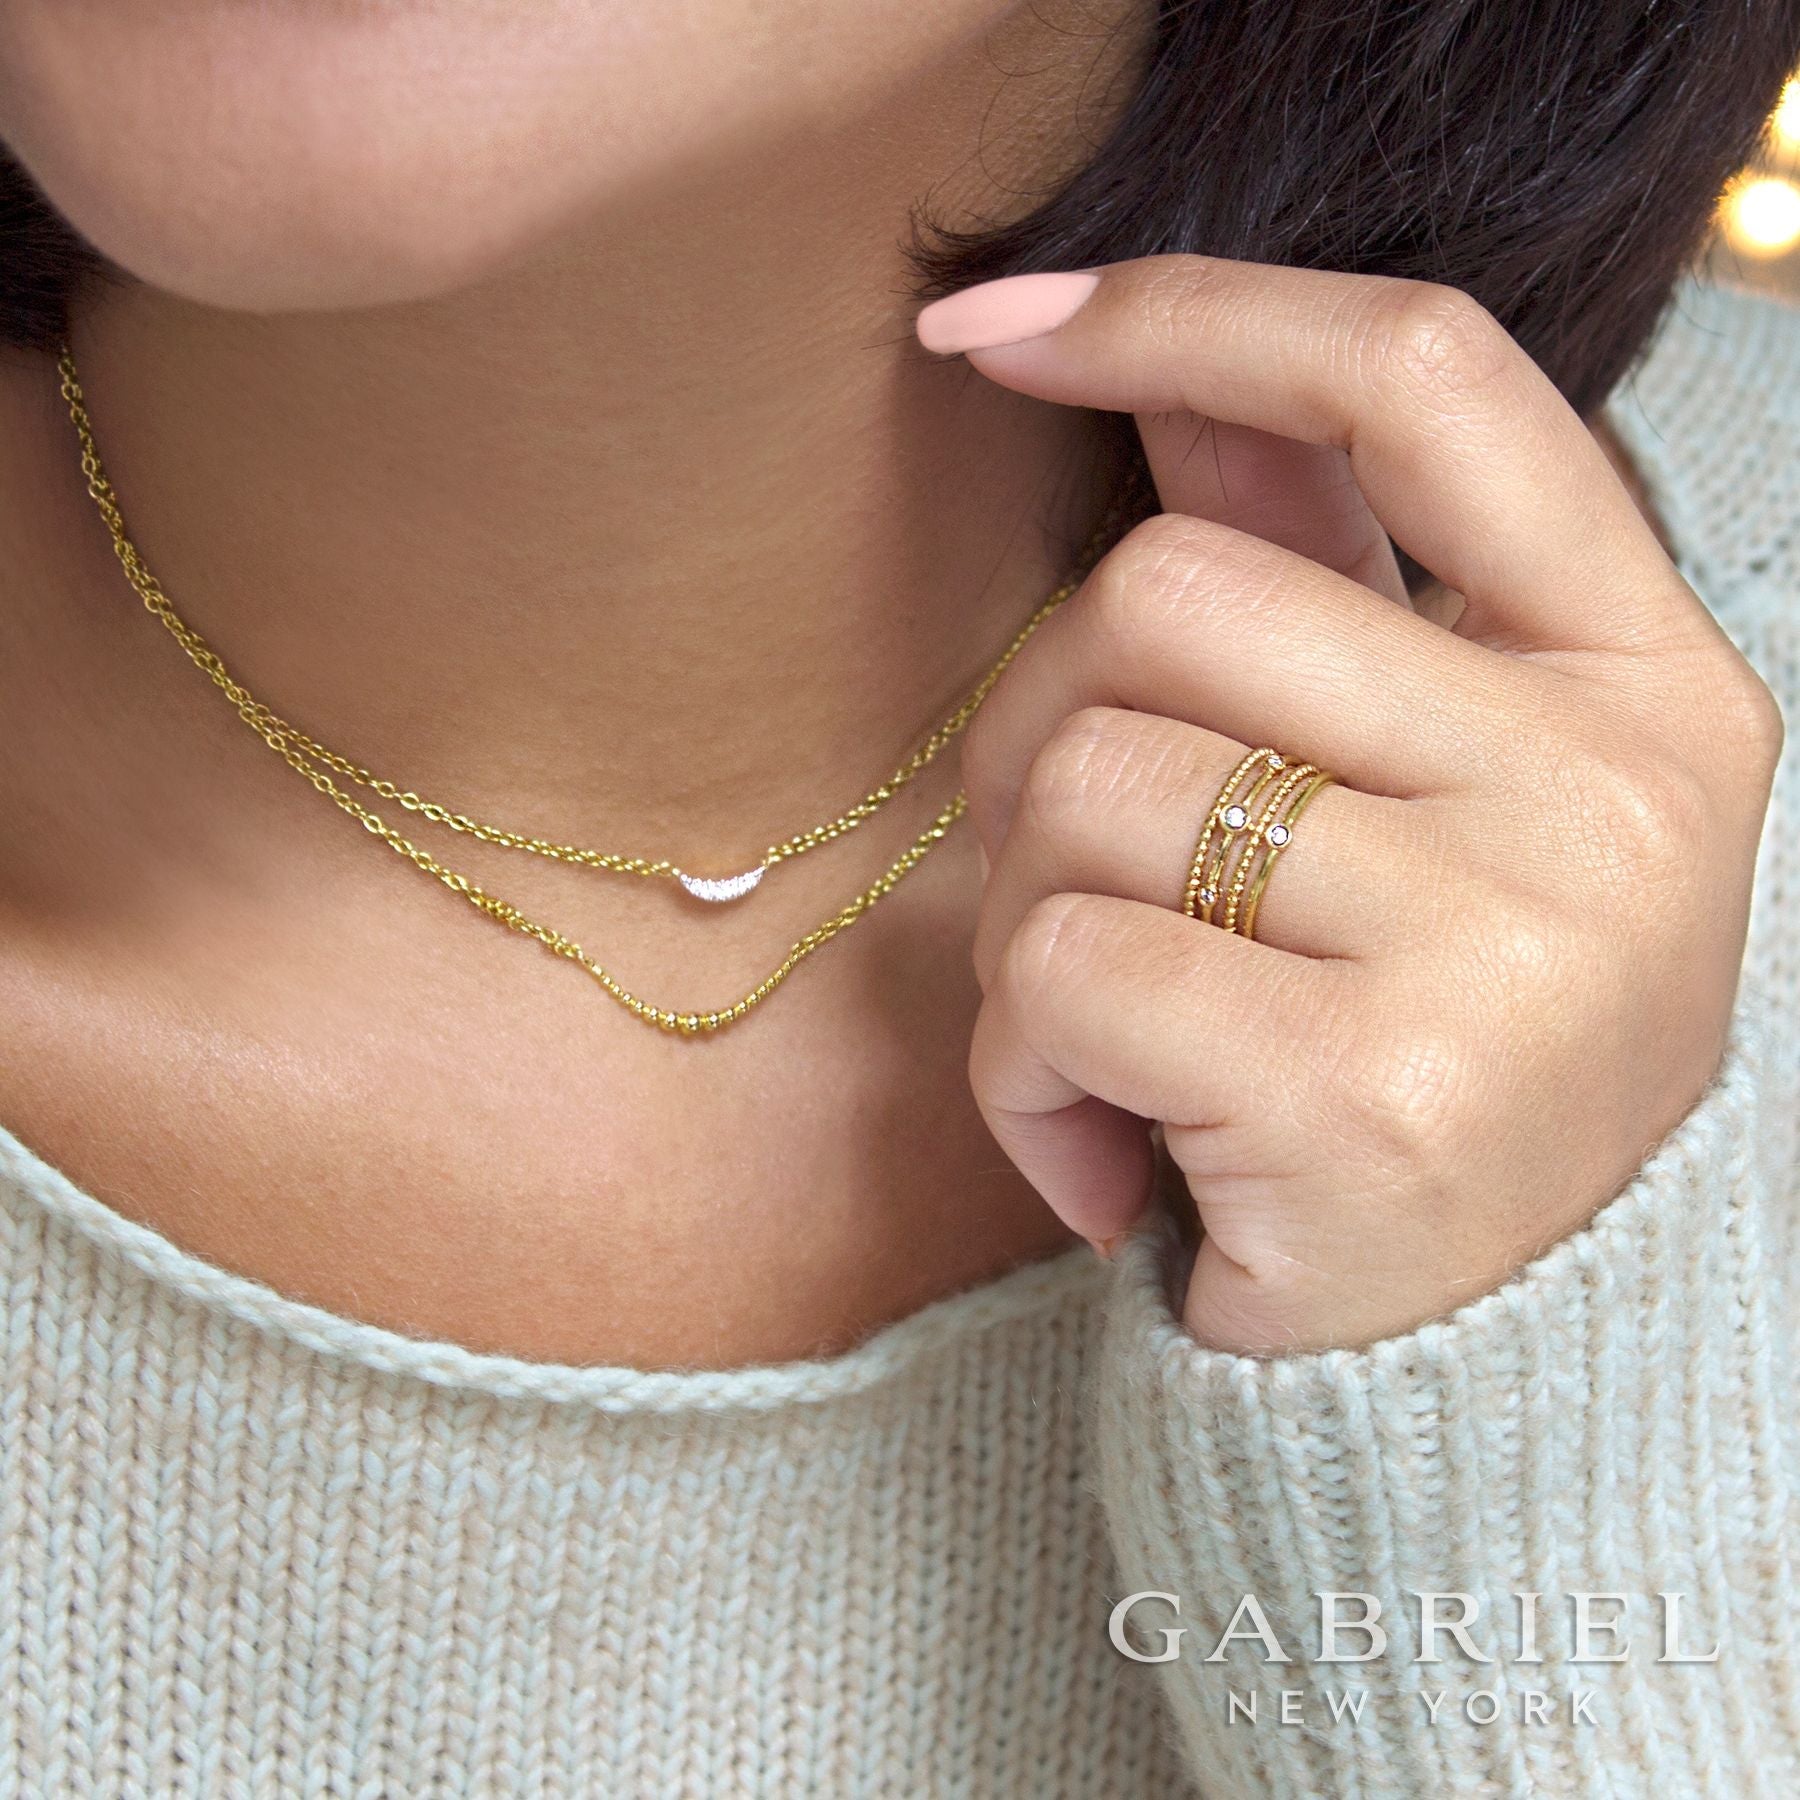 Five Amazing Jewelry Gifts for Under 500 Dollars